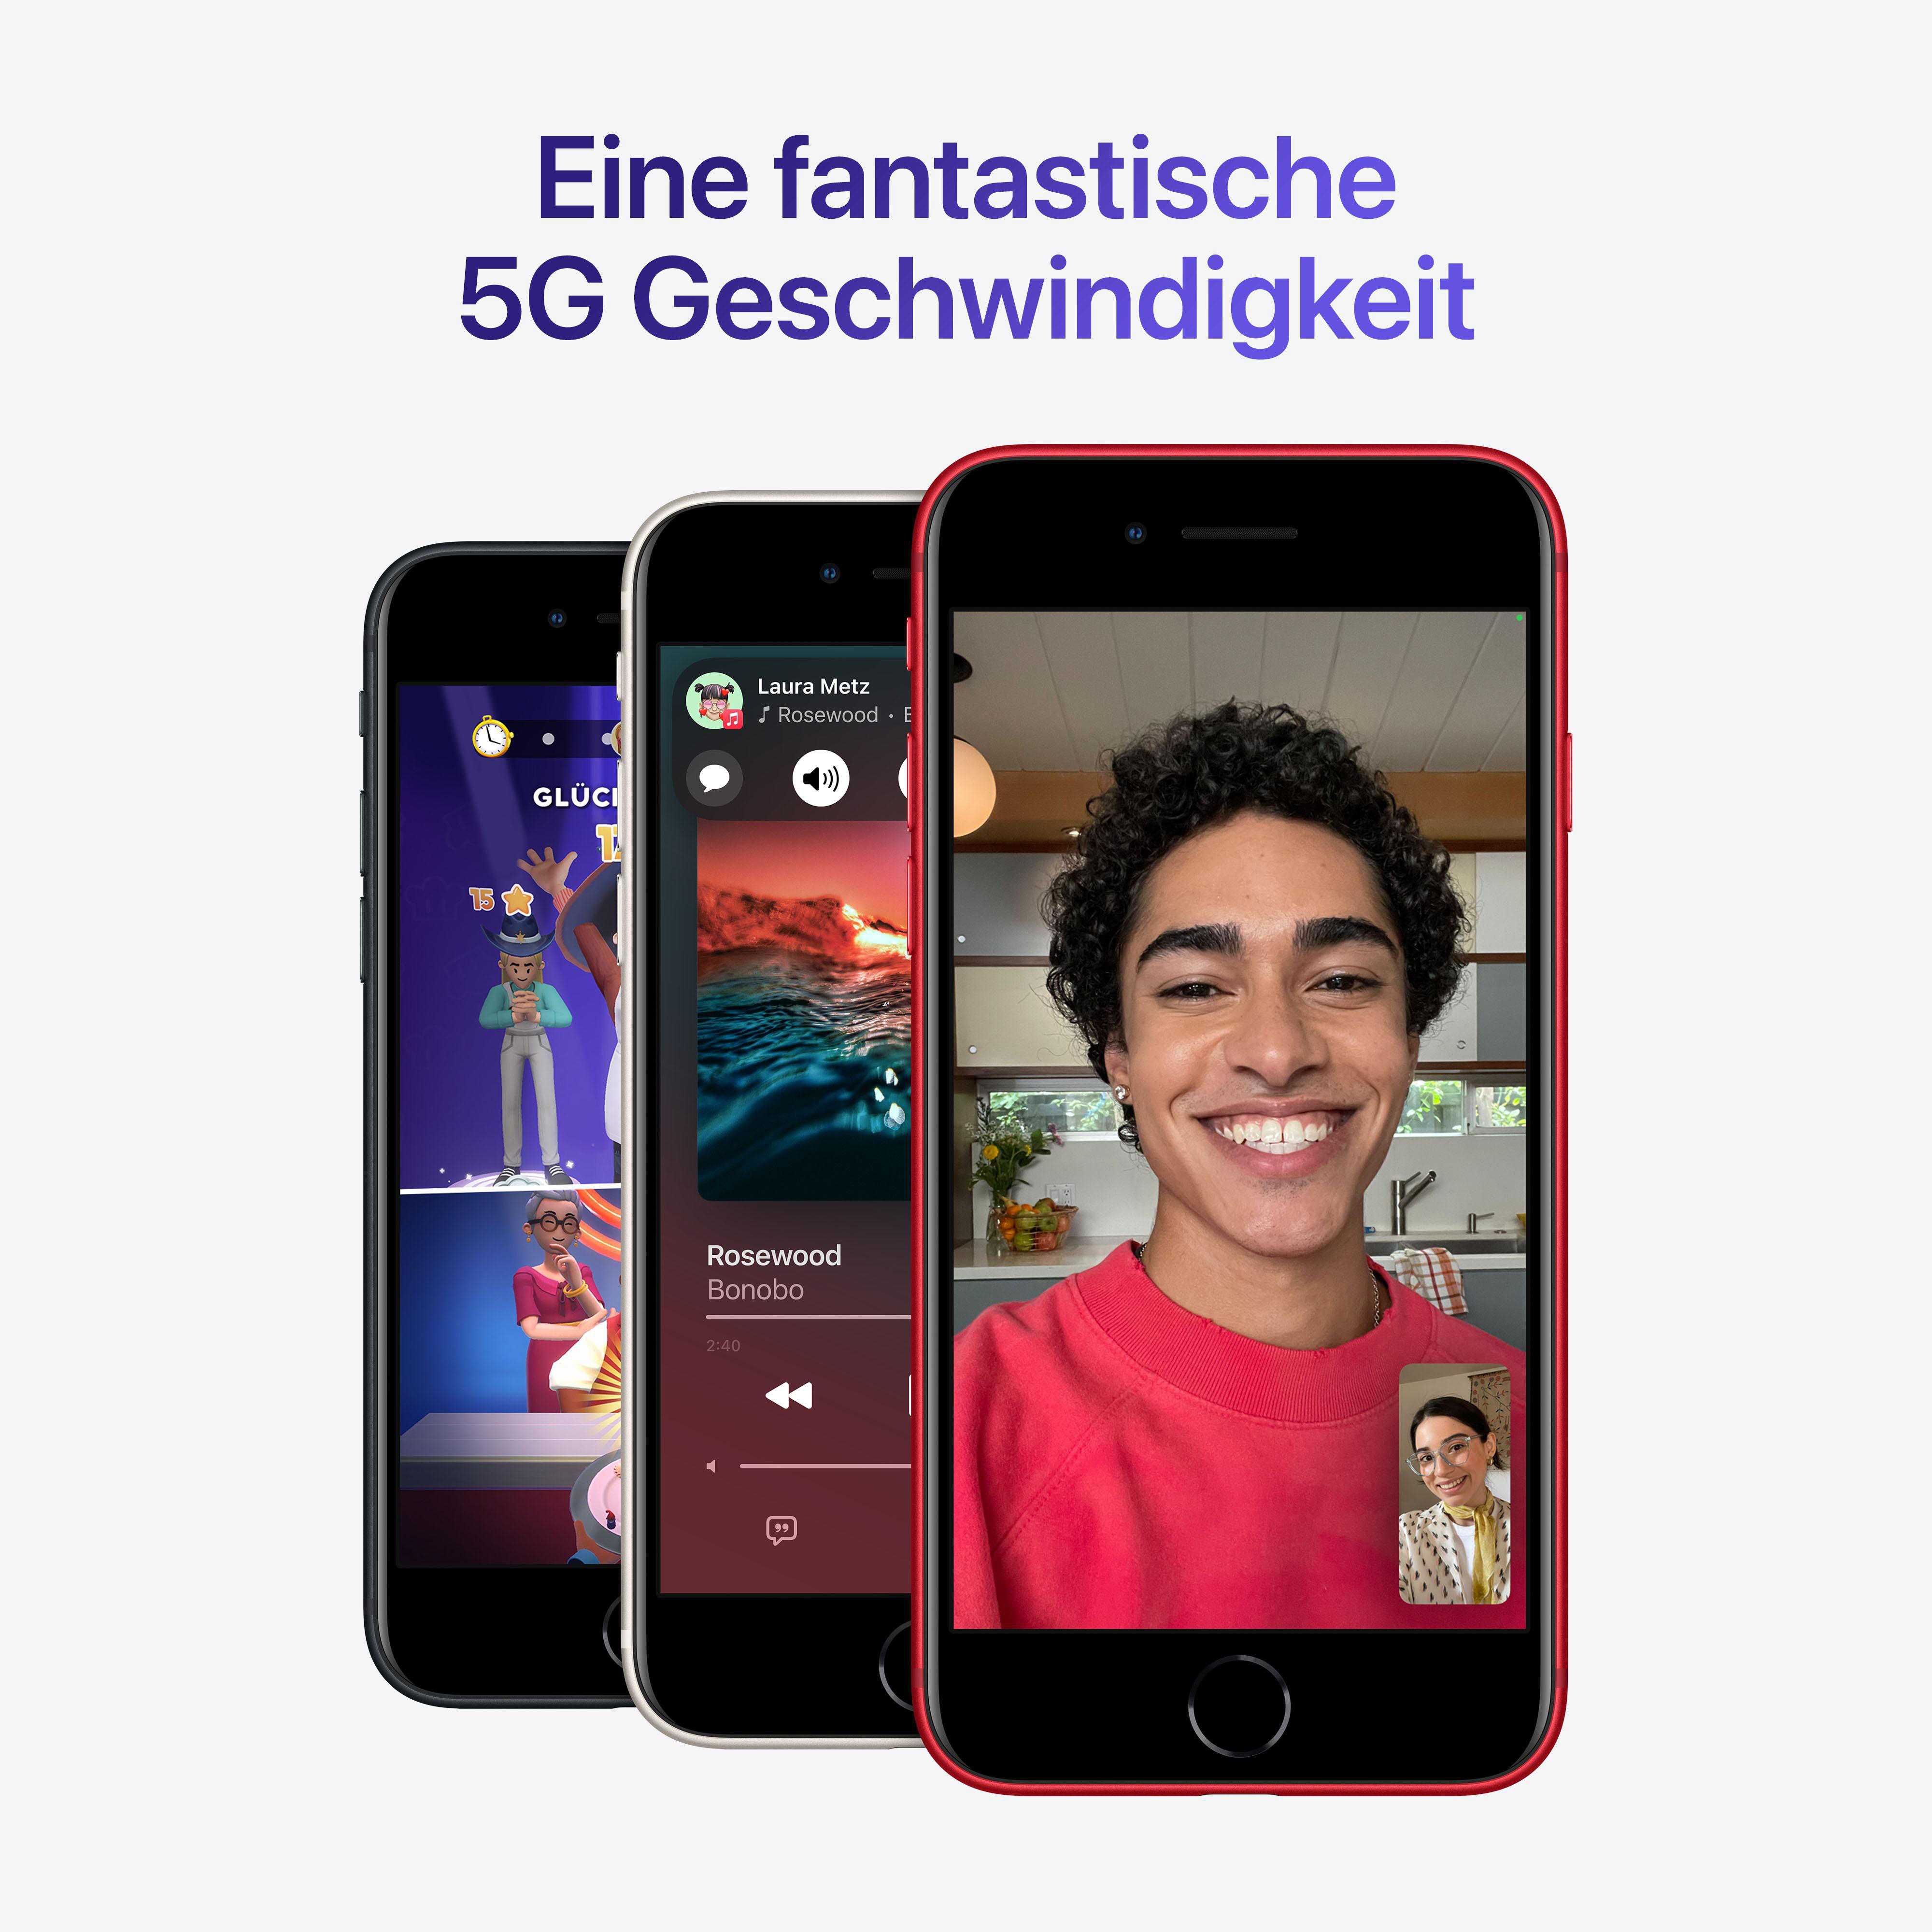 iPhone SE GB 64 (Product) Red APPLE